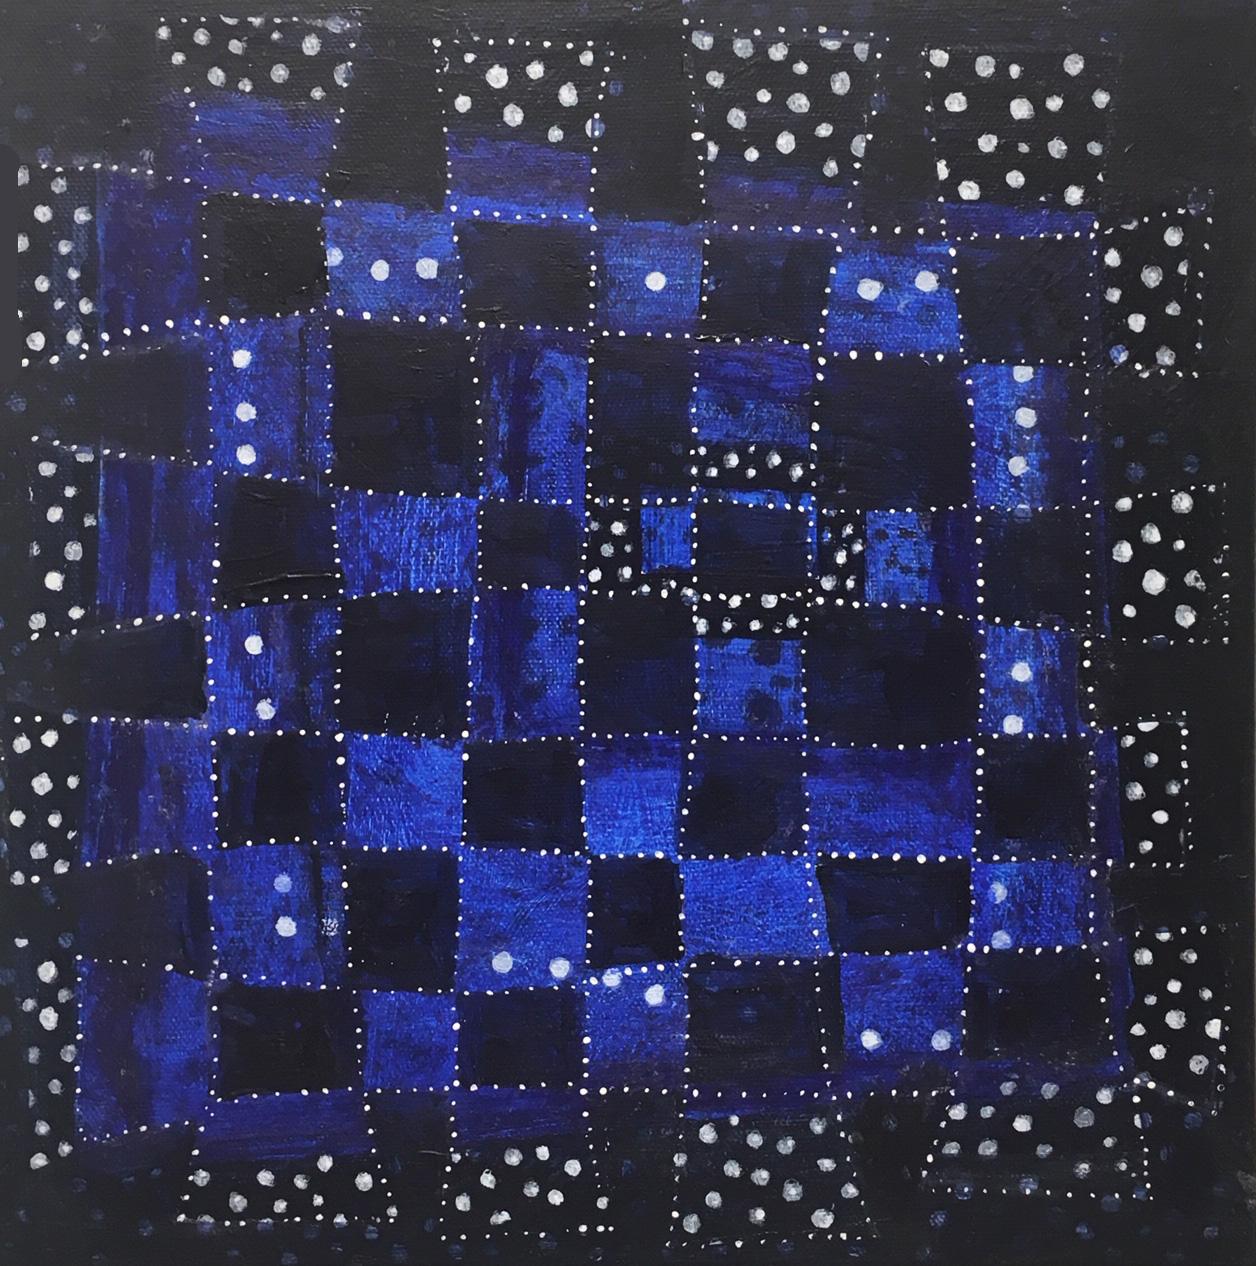 Andra Samelson’s work explores the relationship of microcosm and macrocosm, emptiness and form. The imagery in her paintings is often associated with molecular and galactic systems. Rendering forms from the inside, her migrating, dotted lines, made